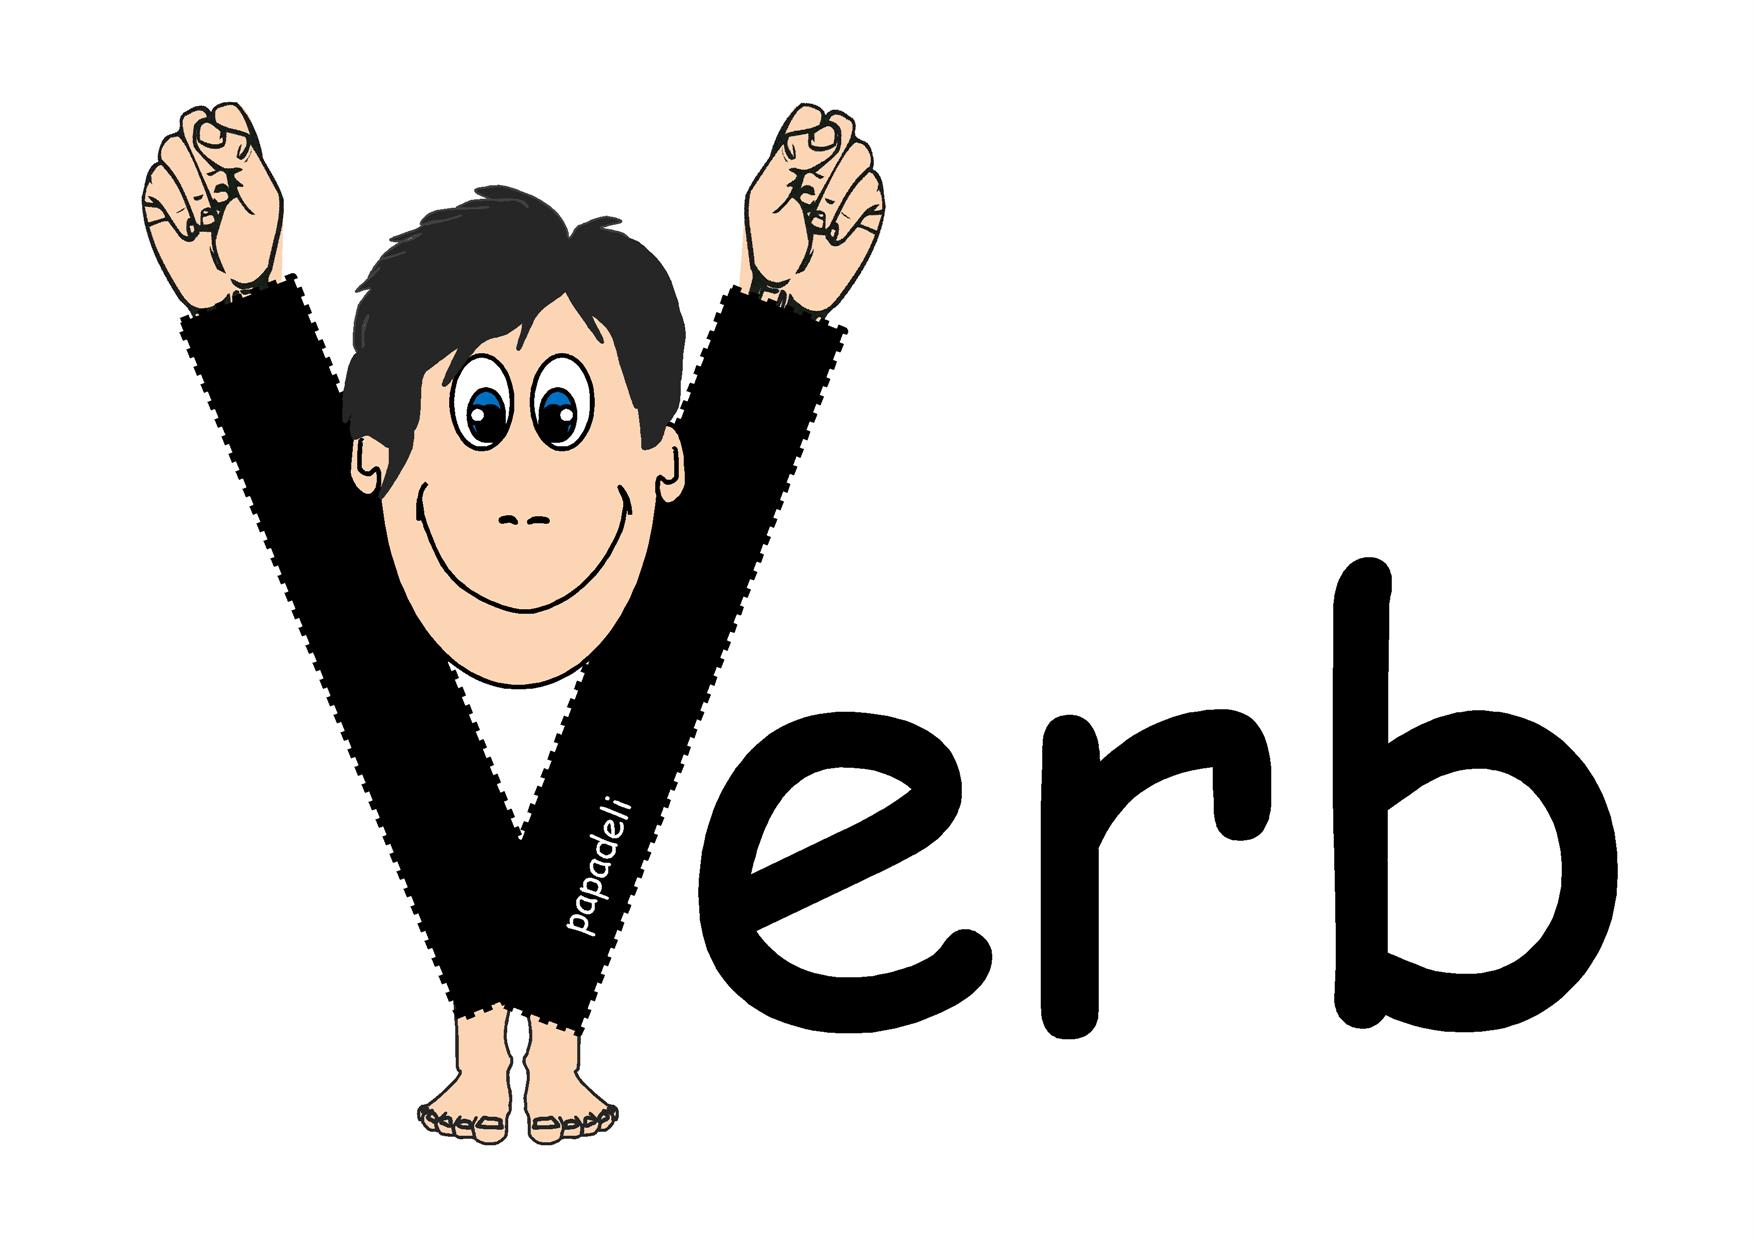 types-of-verbs-with-examples-in-english-verb-types-ilmrary